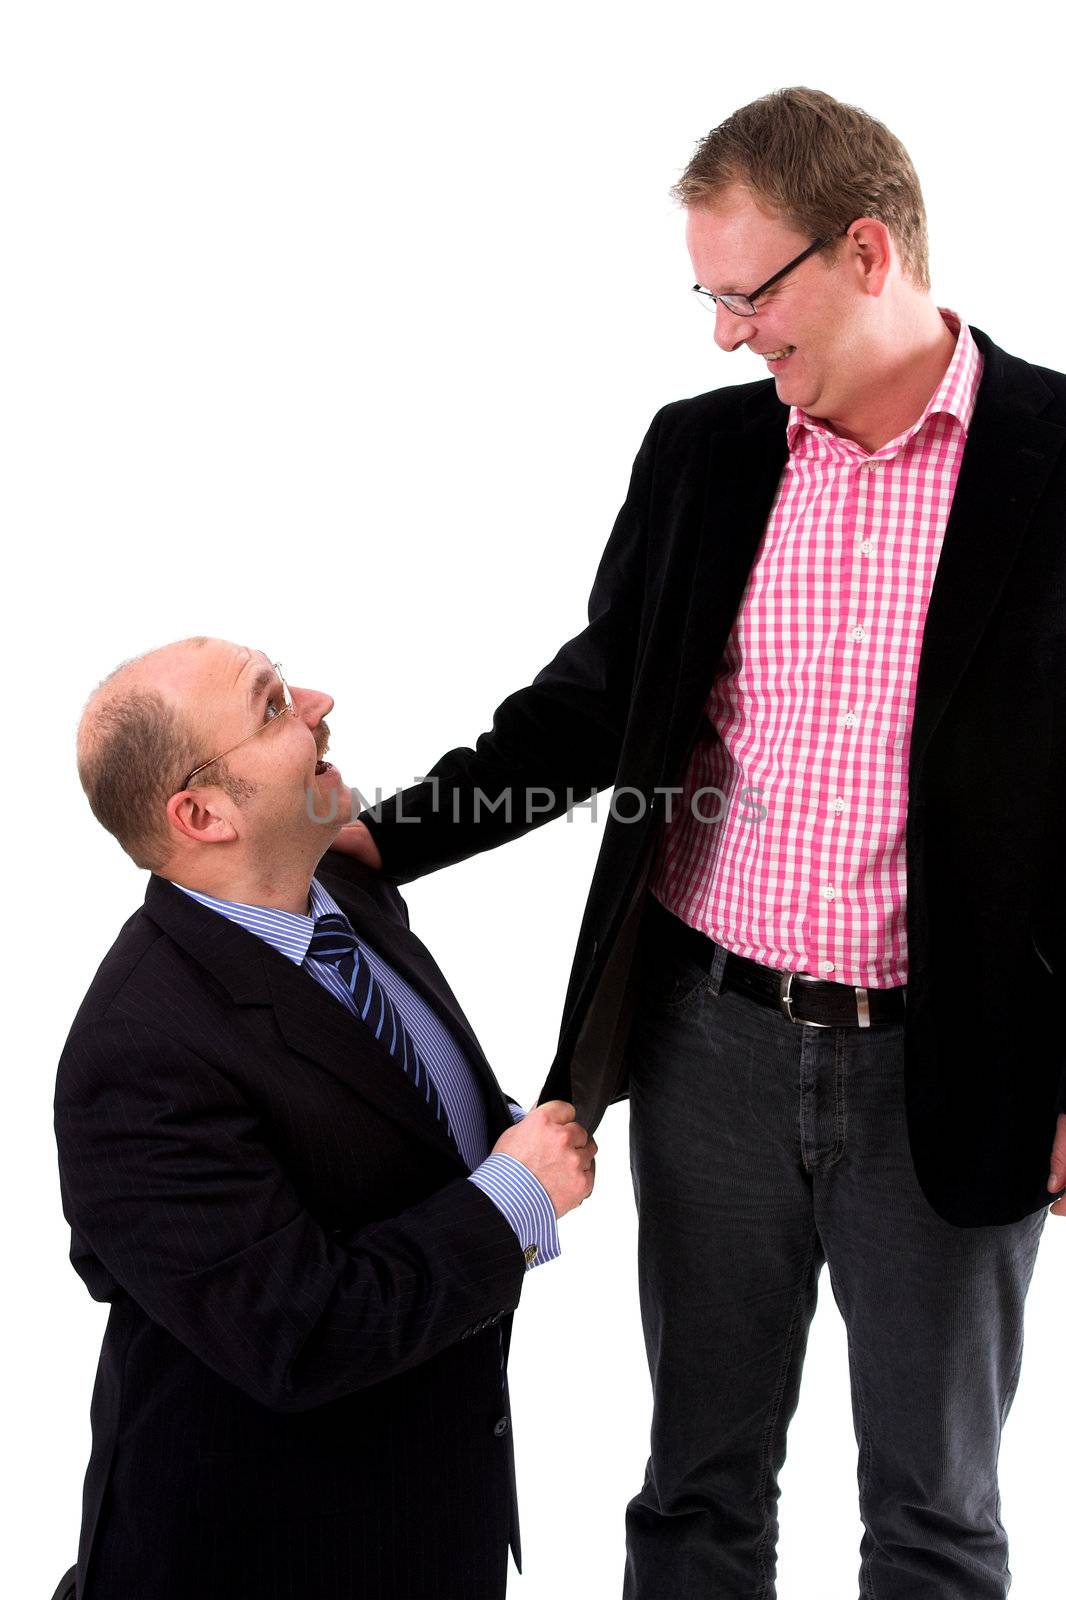 Two businessman standing next to eachother on white background